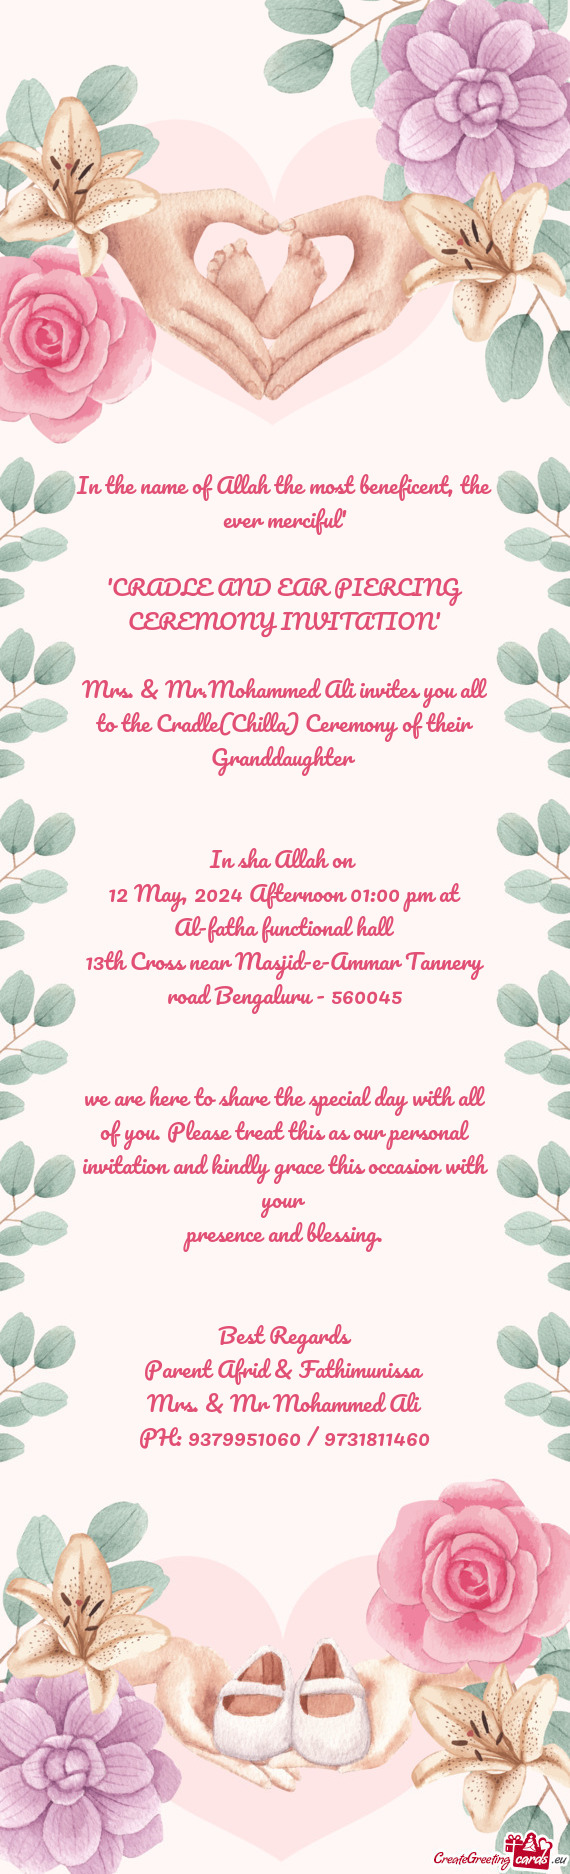 Mrs. & Mr.Mohammed Ali invites you all to the Cradle(Chilla) Ceremony of their Granddaughter